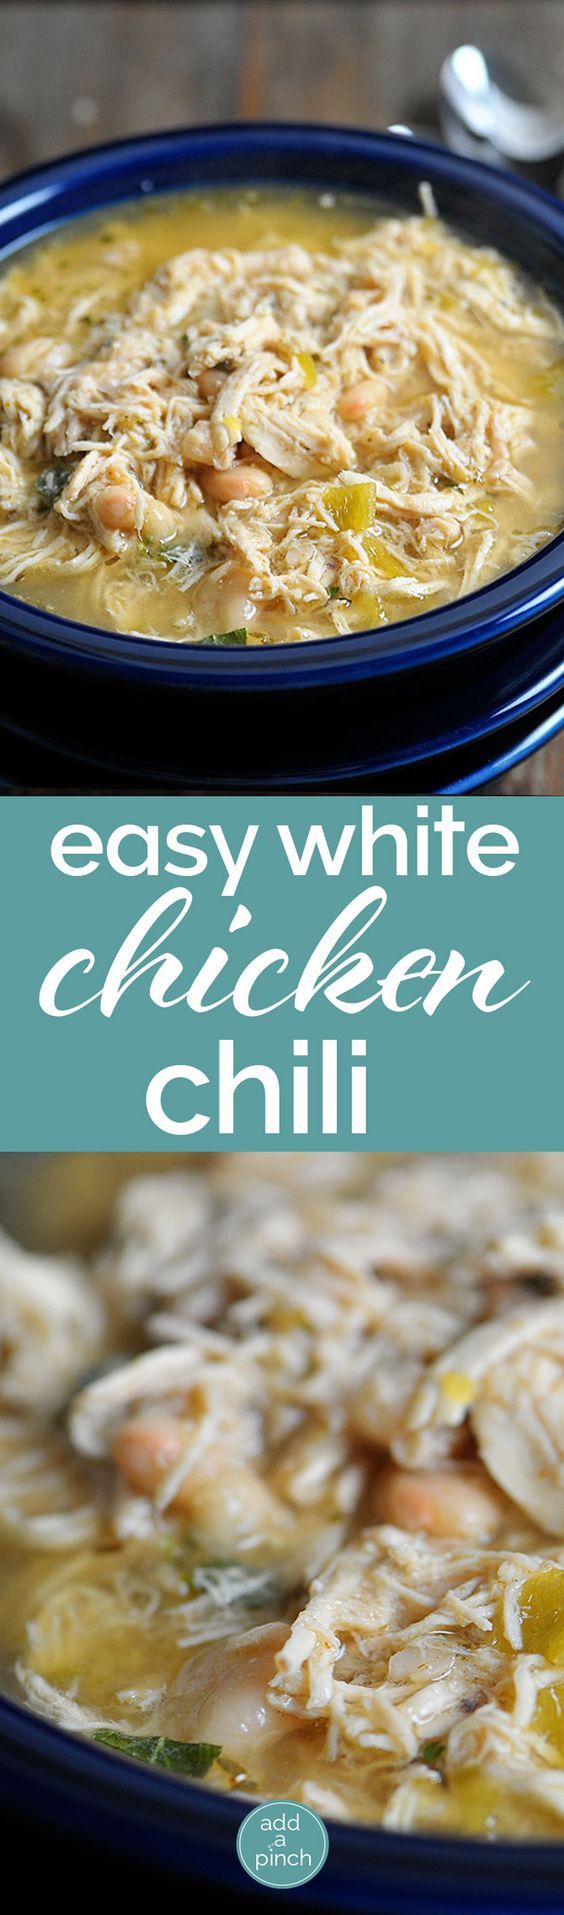 White Chicken Chili makes a delicious meal full of spicy chili flavor, white beans and chicken. Youll love this easy White Chicken